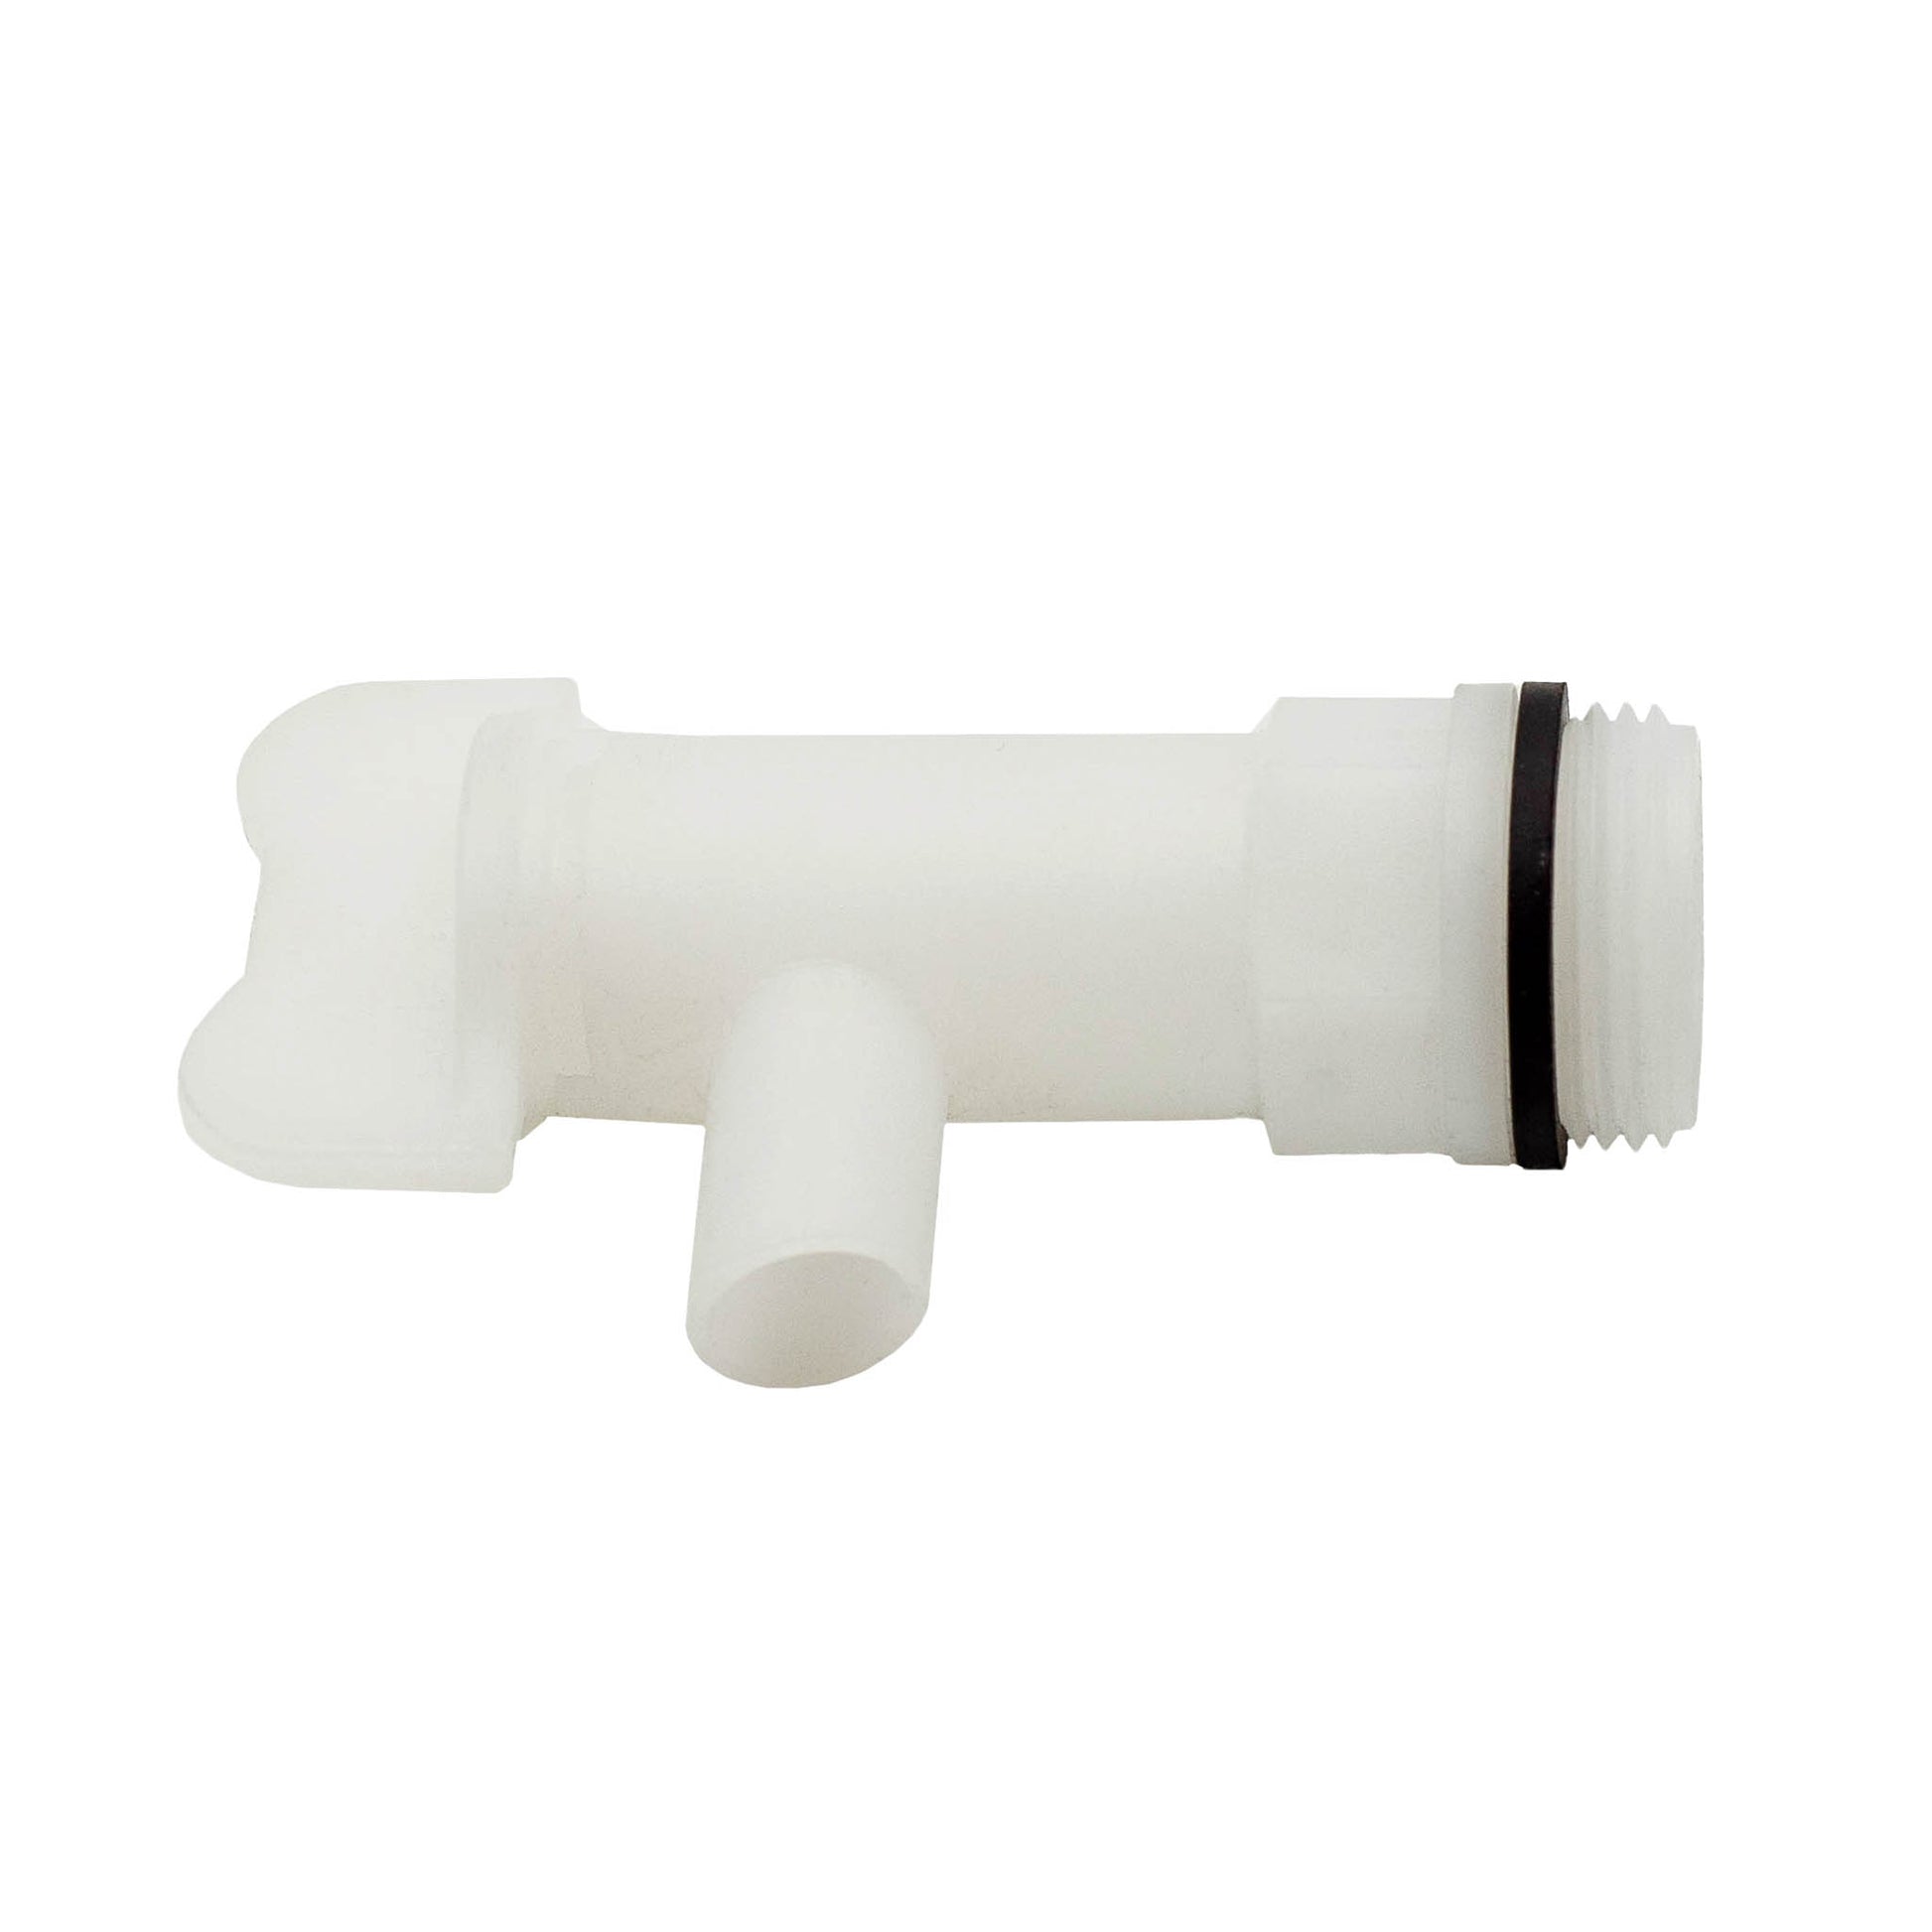 White plastic tap with 19mm thread to suit our 15, 30 and 60 litre plastic fermenters.